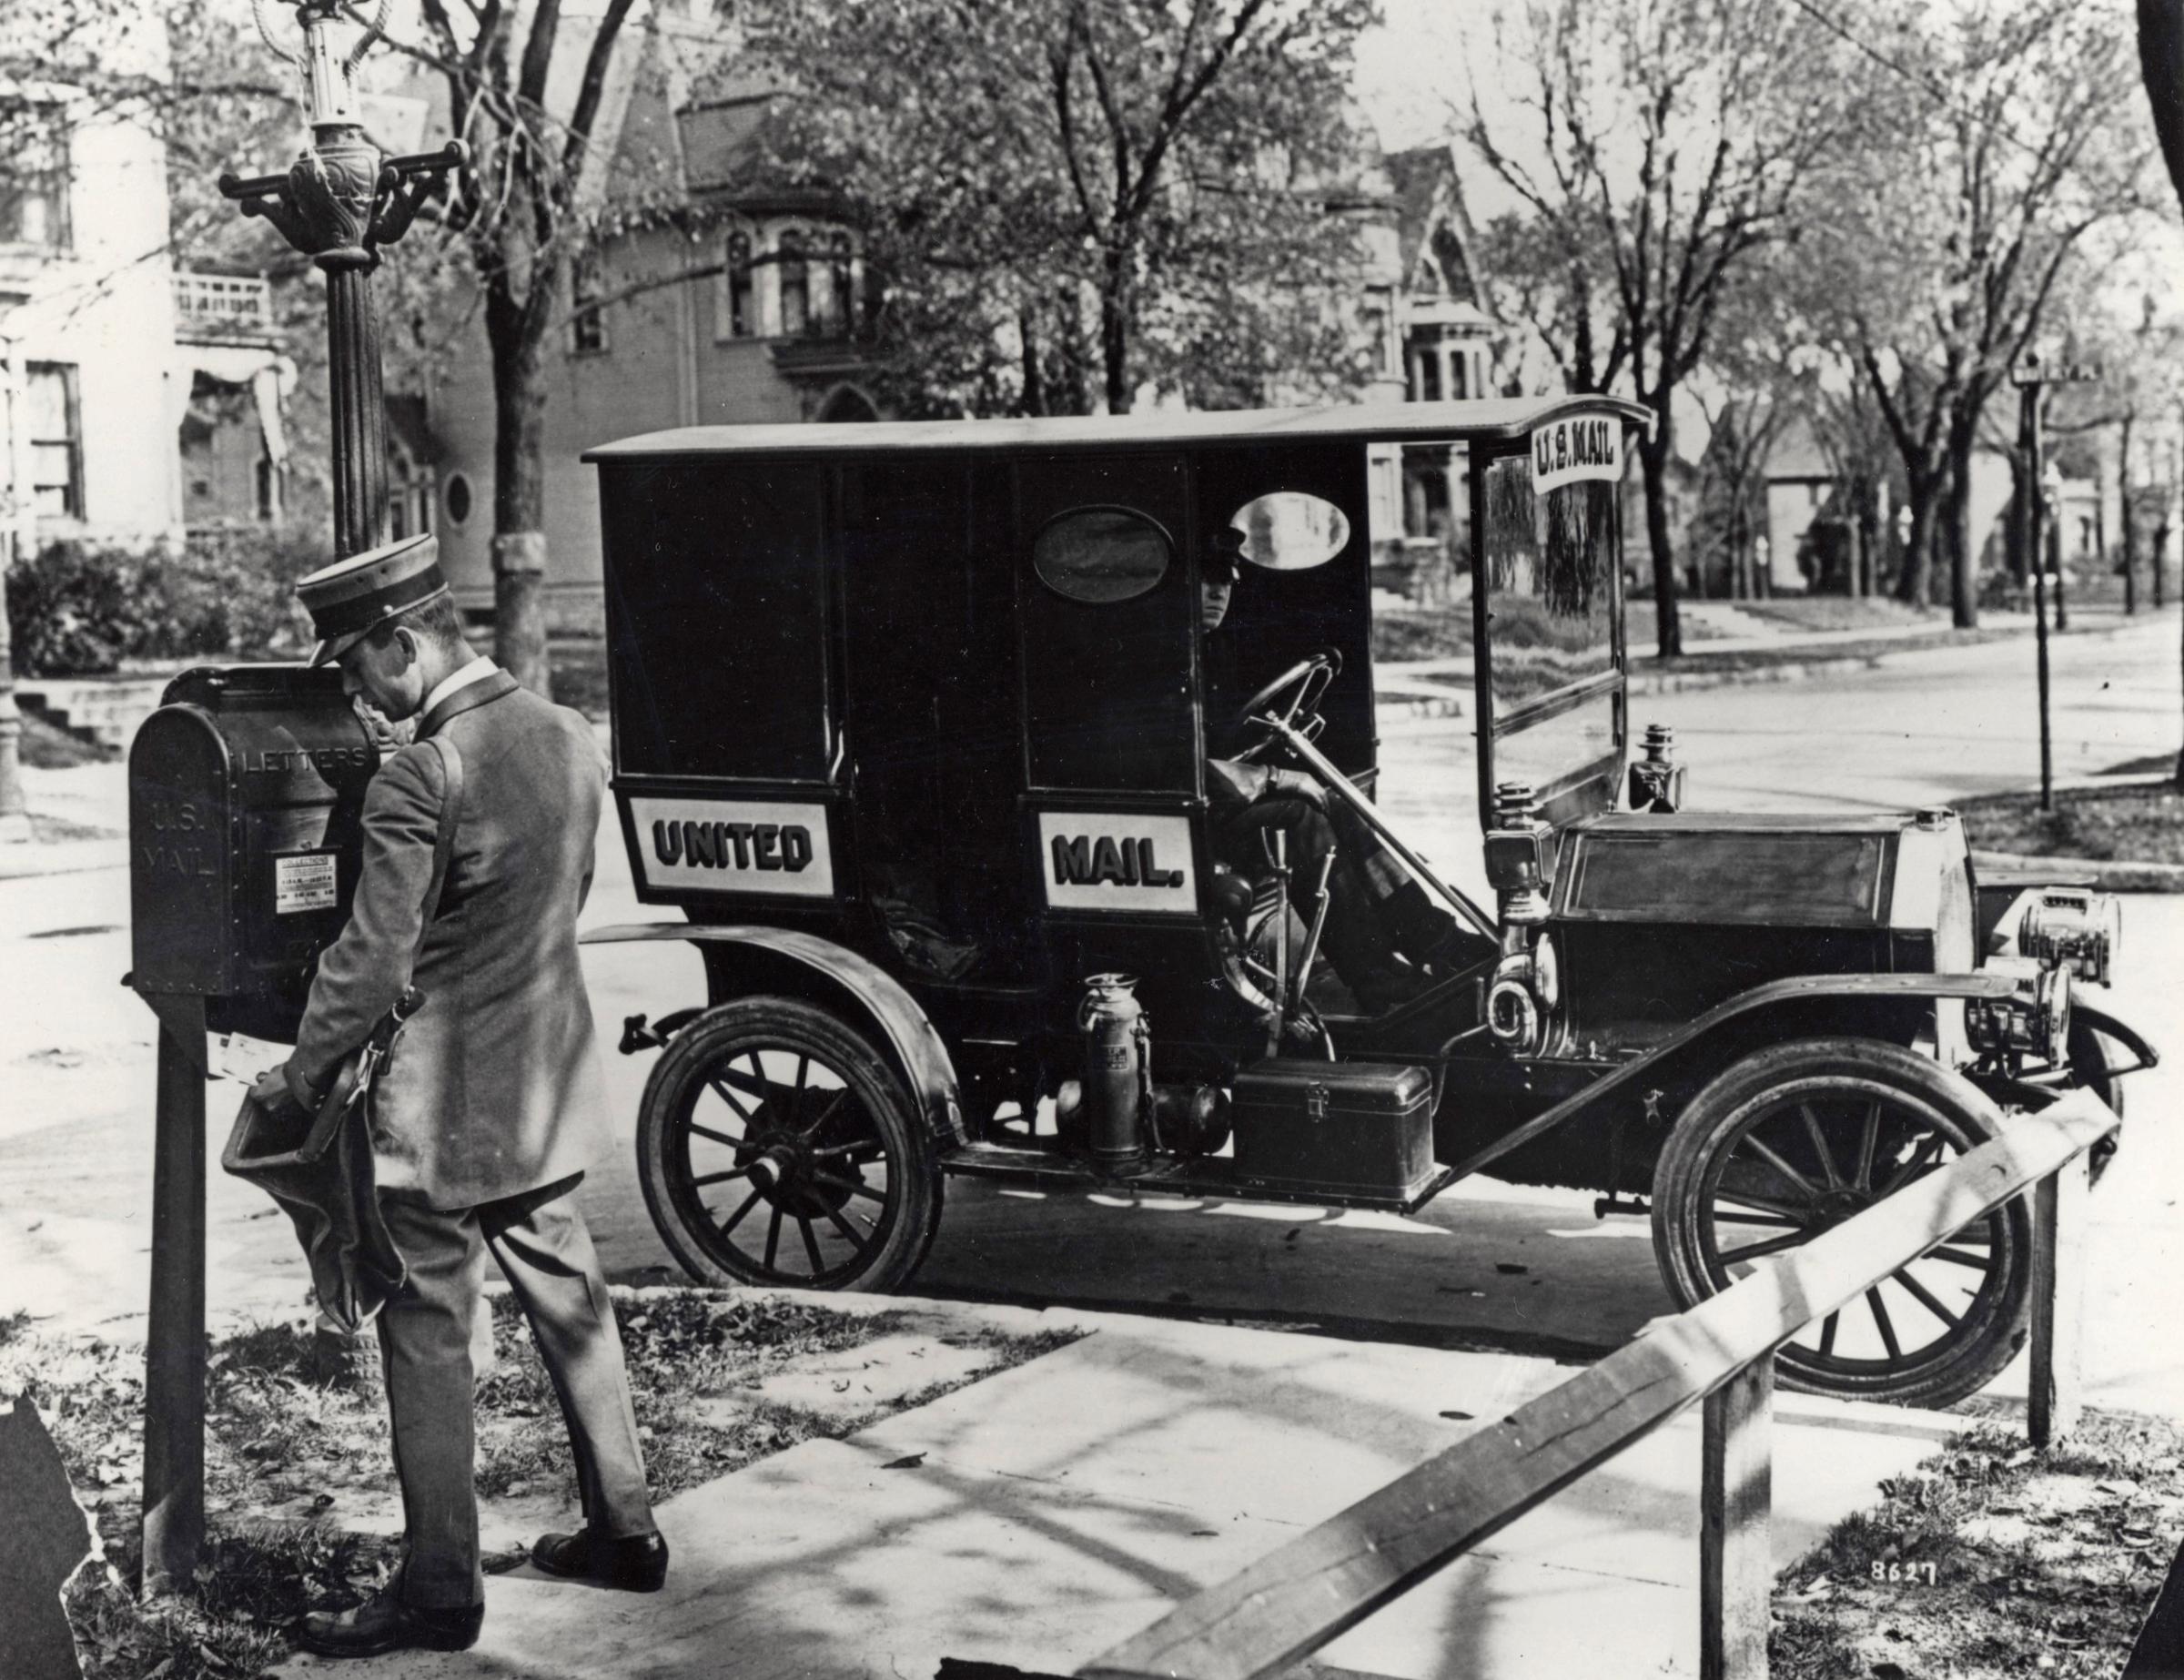 A letter carrier collecting mail from a sidewalk mail collection box. His mail truck is parked at the curb. 1915.